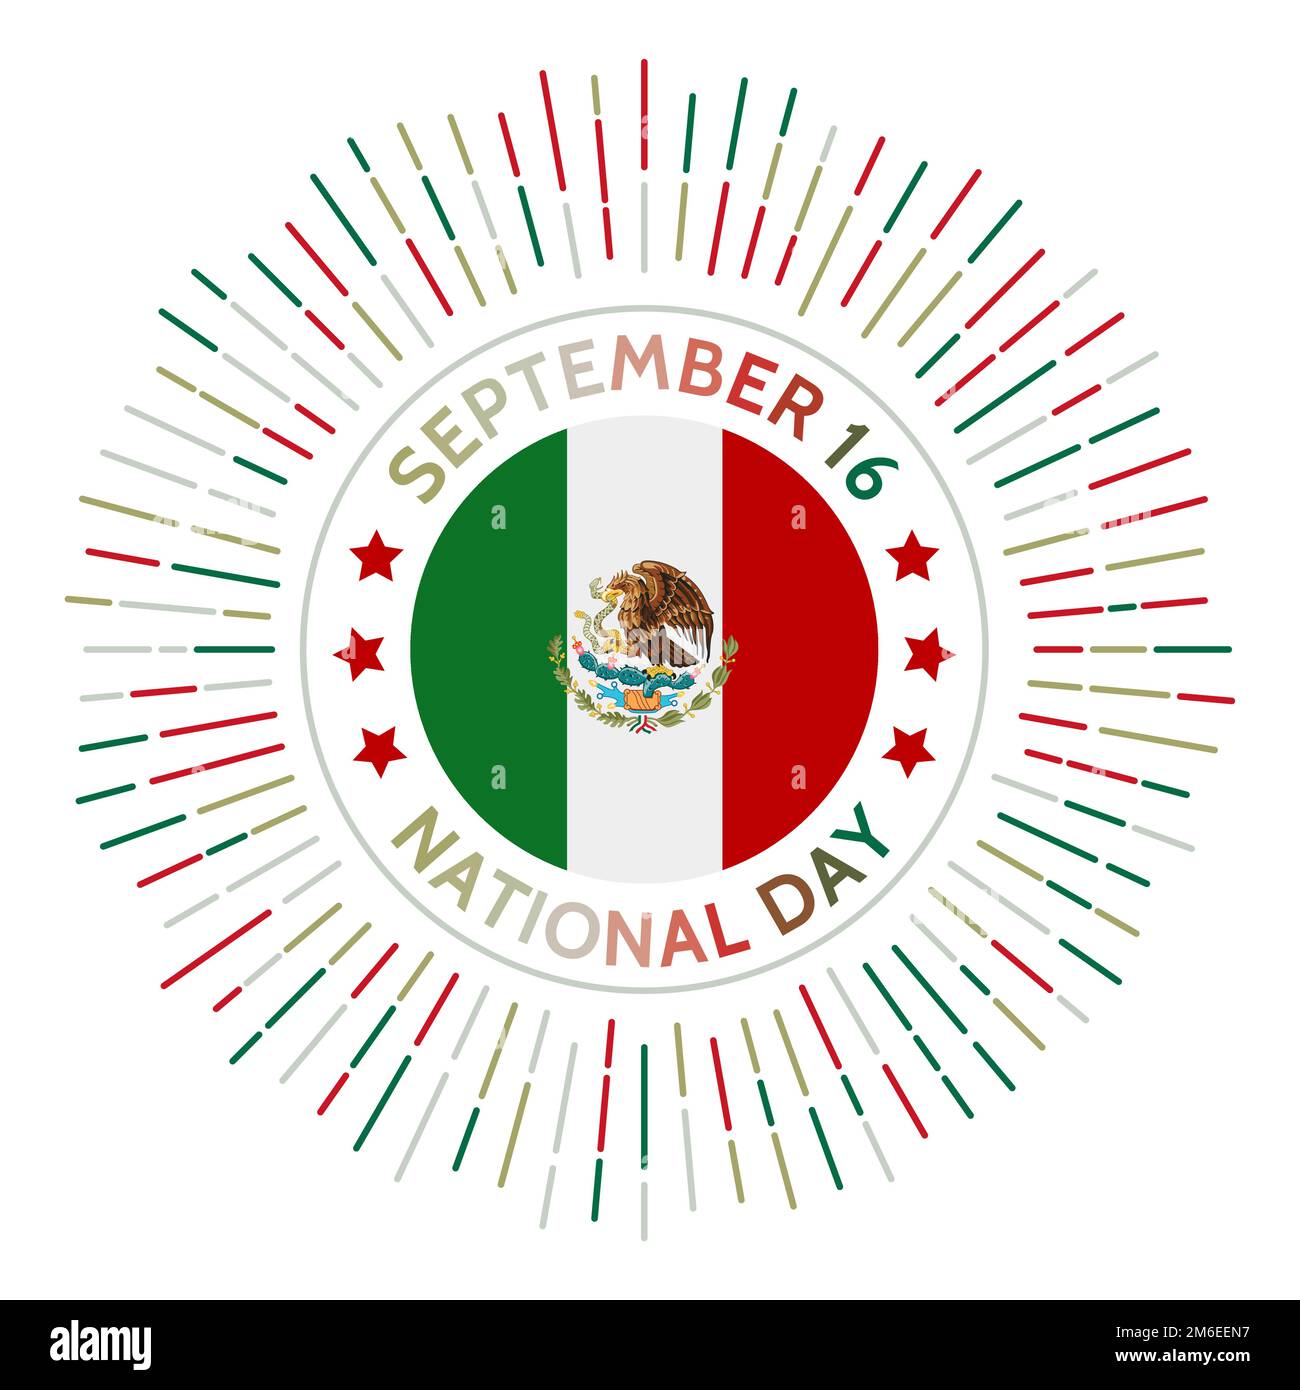 Mexico national day badge. Independence from Spain declared in 1810. Celebrated on September 16. Stock Vector